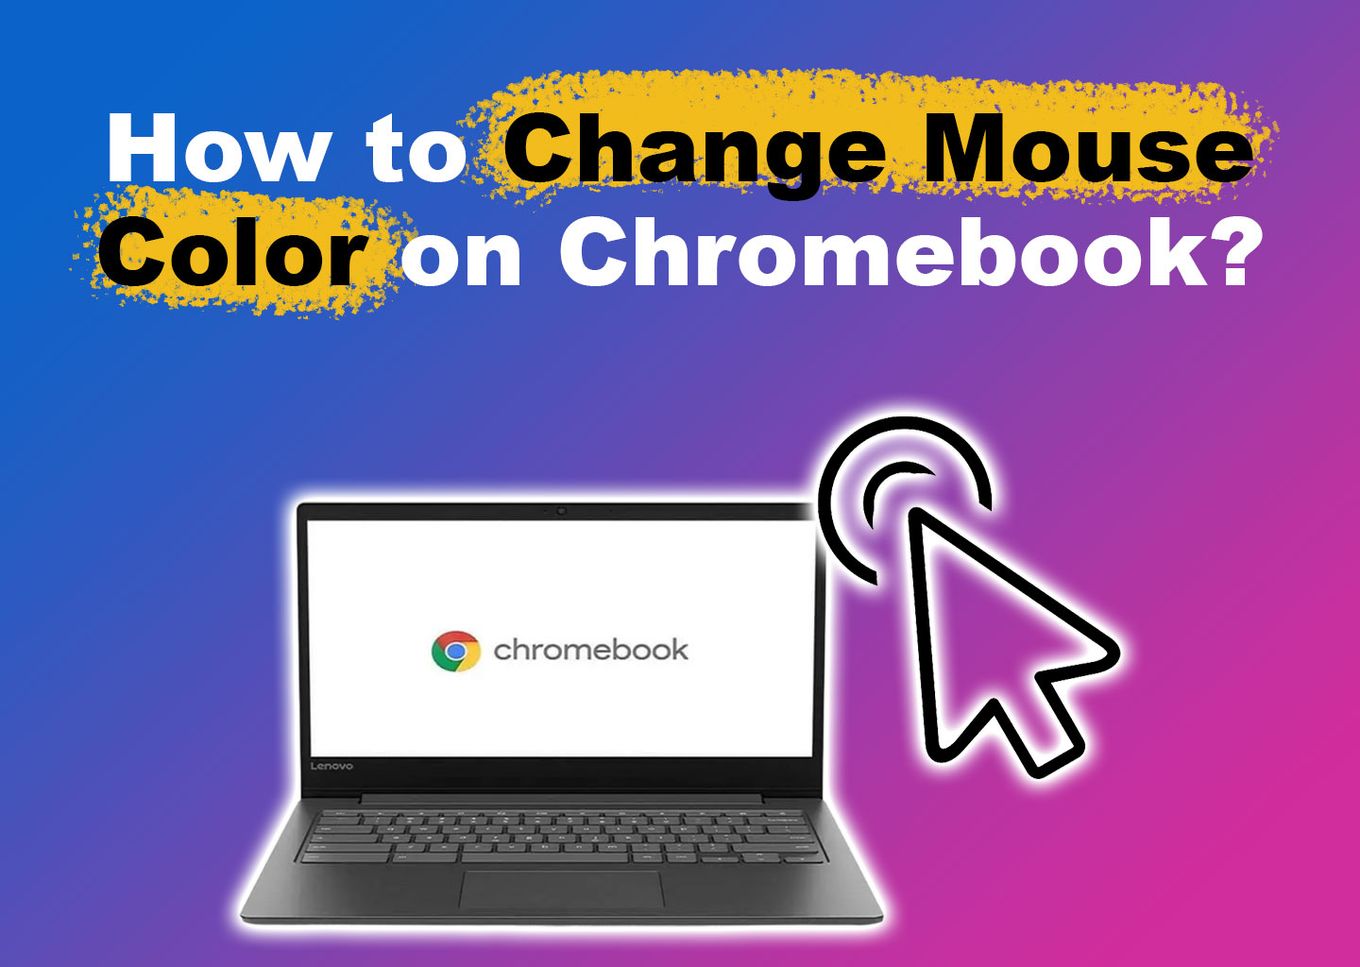 5 Custom Cursor Chrome Extensions To Get Rid of That Boring Mouse